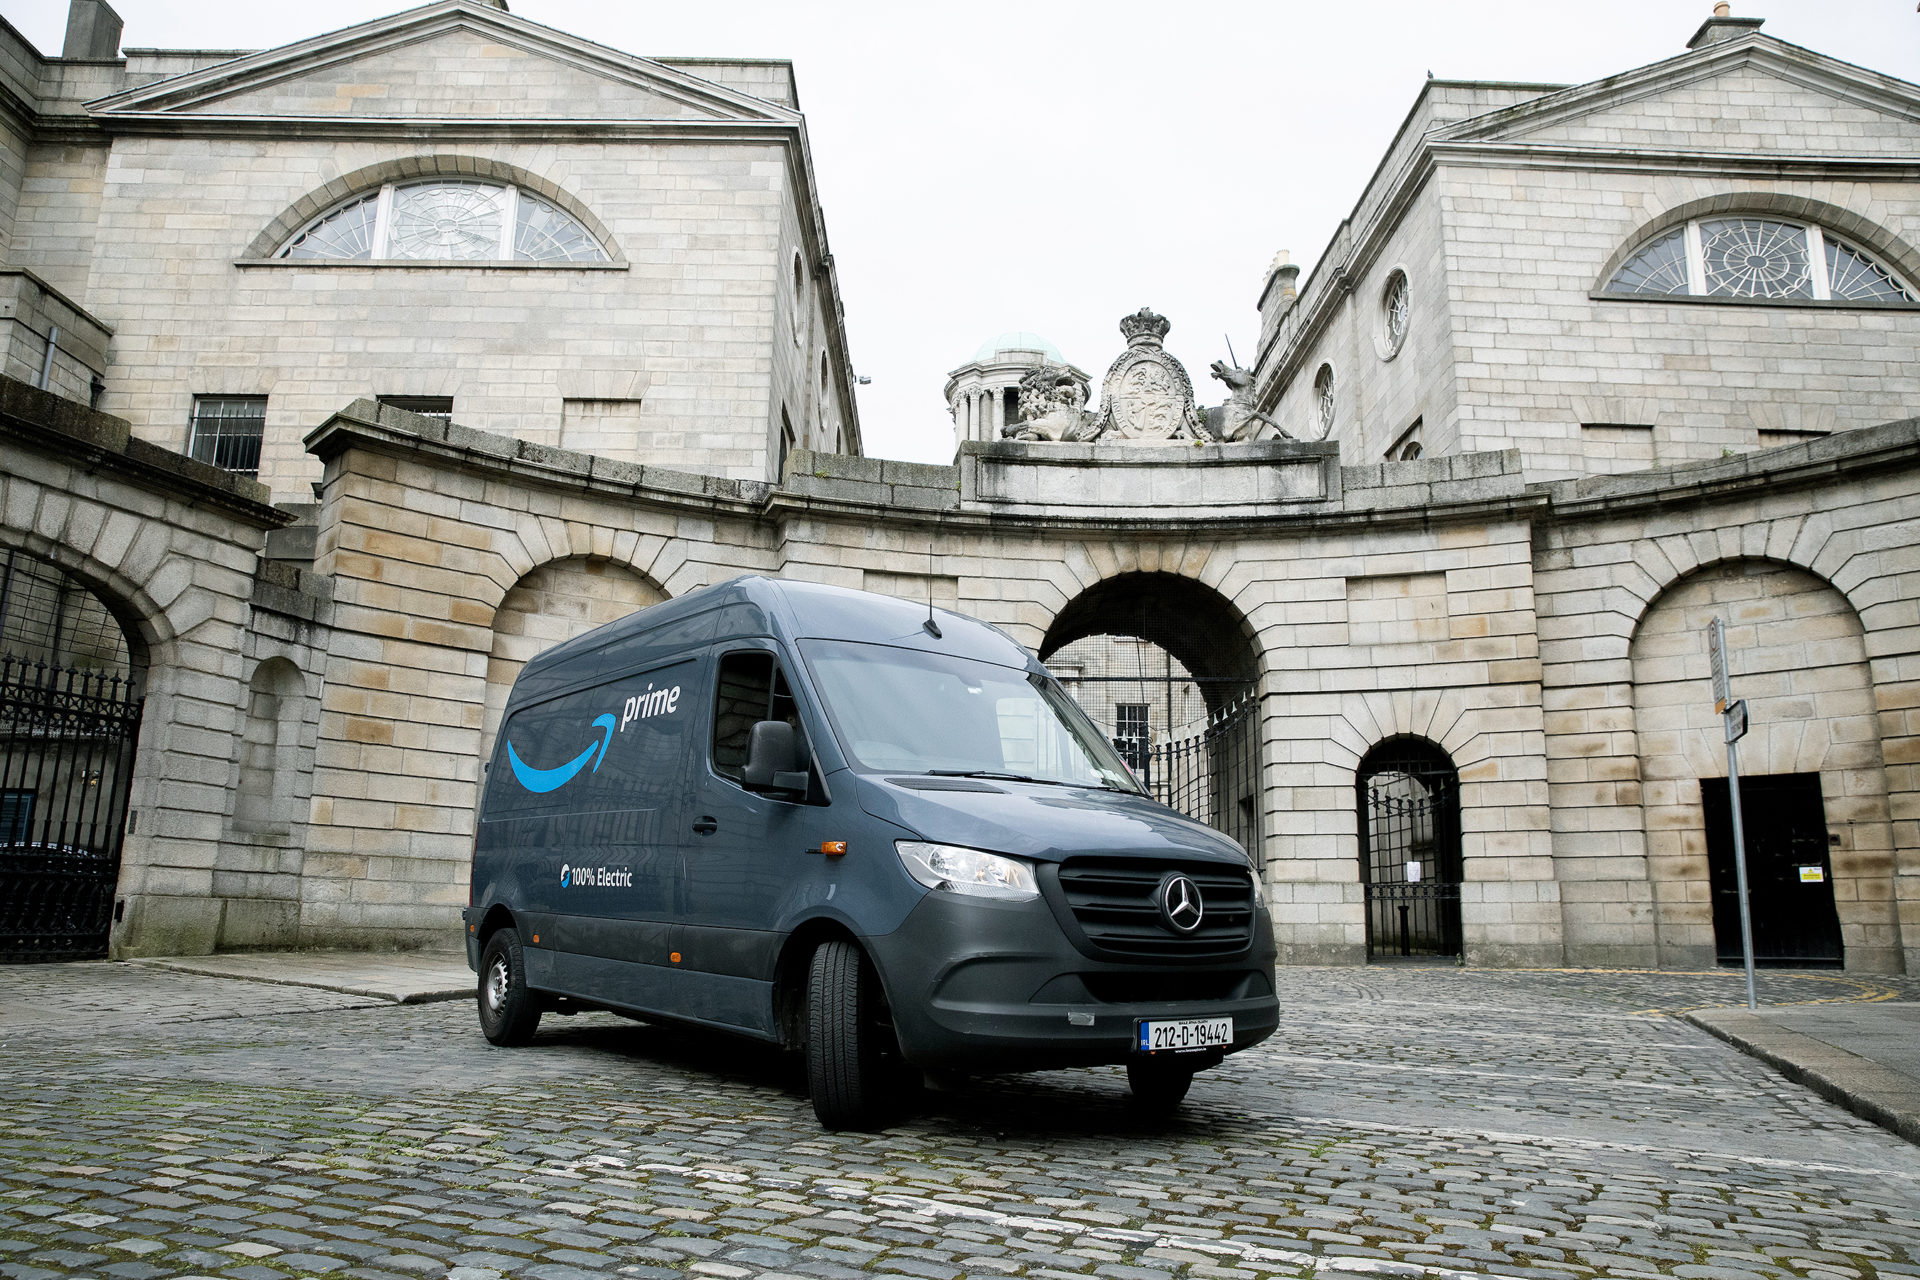 An Amazon delivery van on Havelock Square in Dublin.